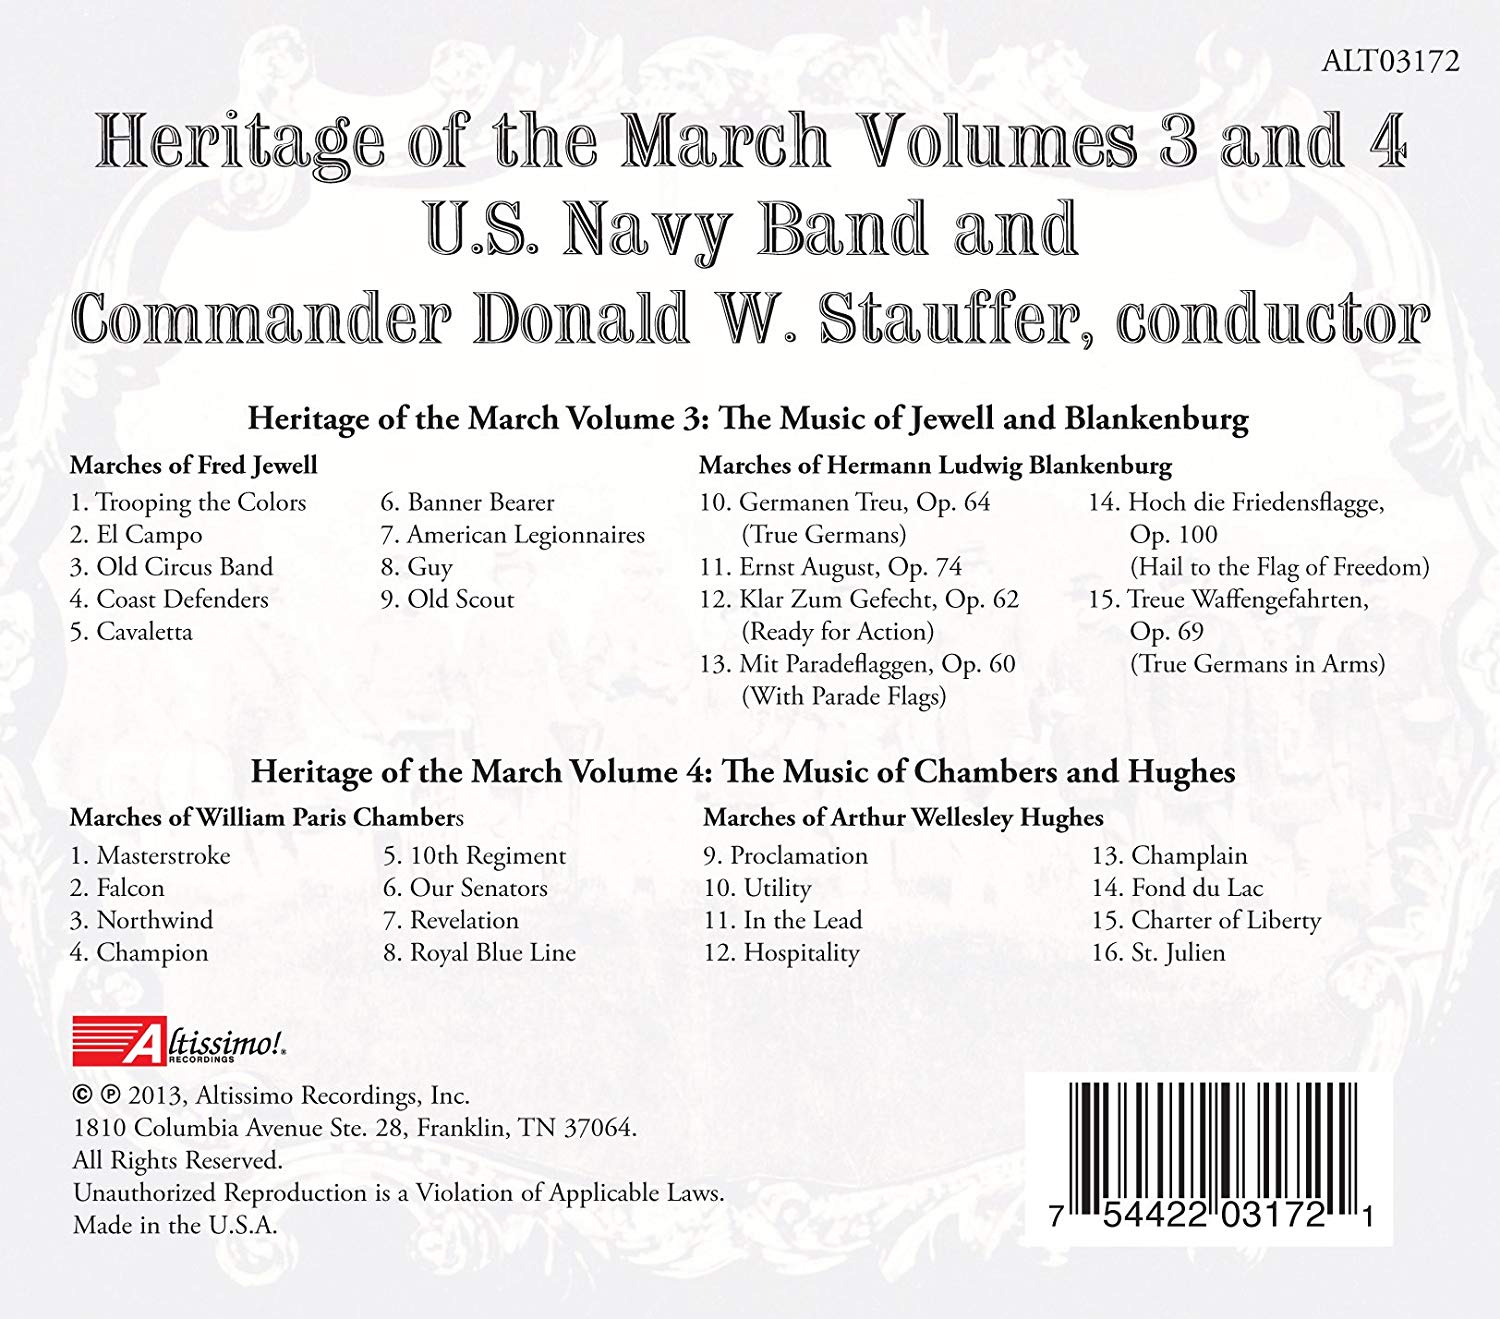 C.M.D. - Heritage of the March Vol. 3 & 4 - Music of Jewell ...